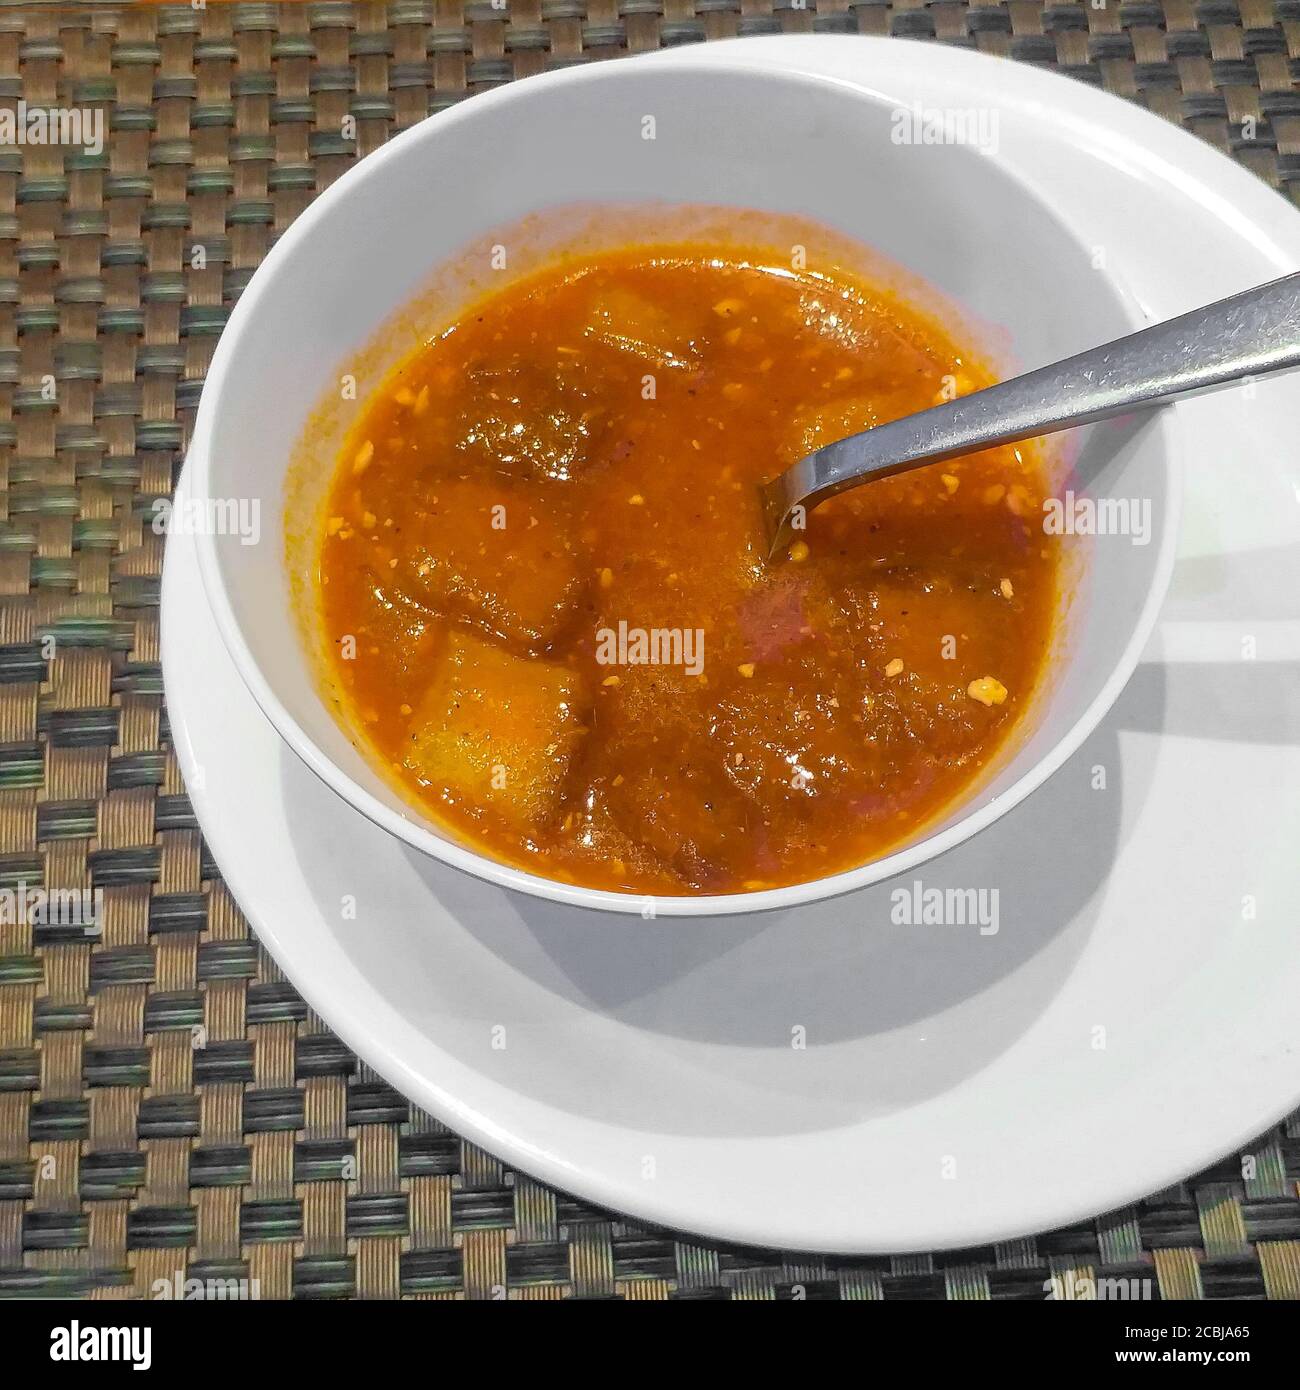 HOT AND SPICY SOUP ON WHITE BOWL Stock Photo